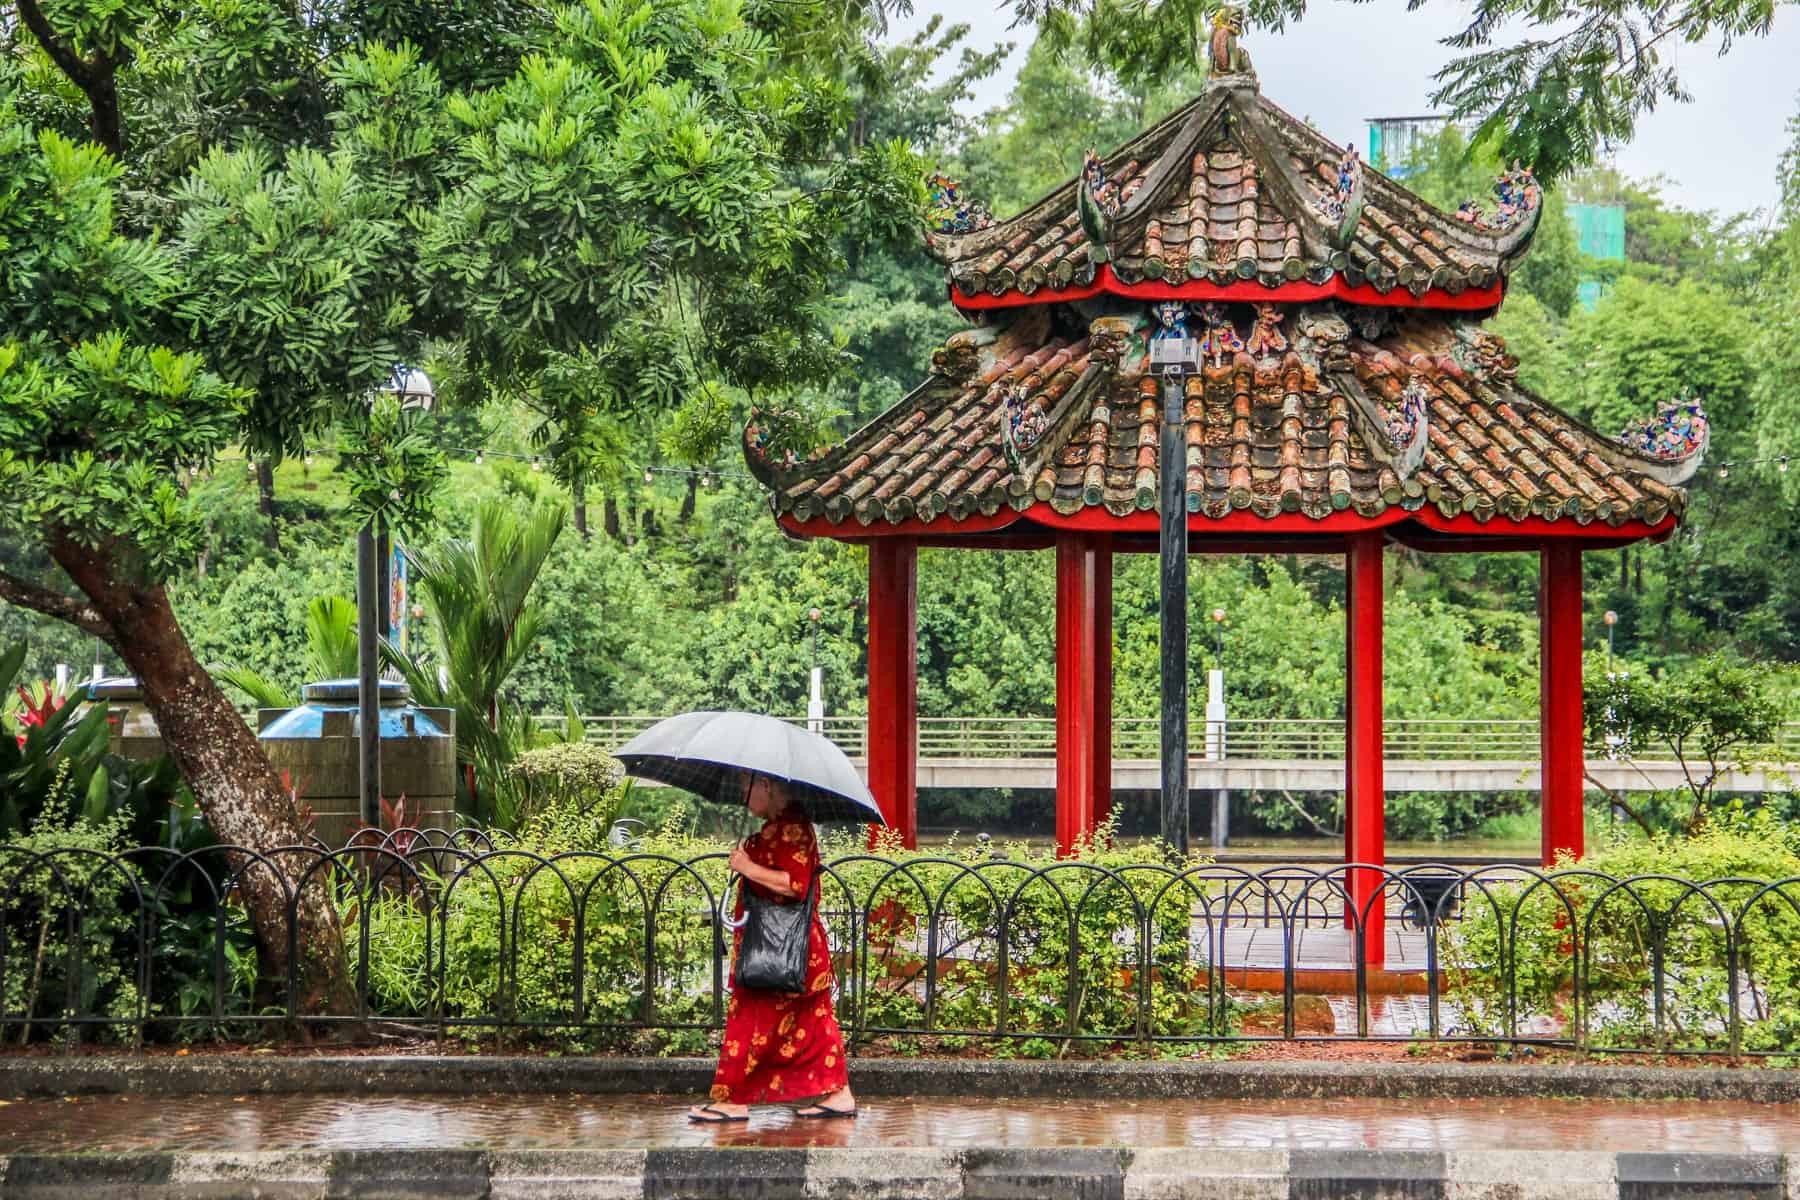 A lady in red, holding a sun umbrella walked past a striking red Chinese Pagoda set within bold green woodland along a riverbank in Kuching